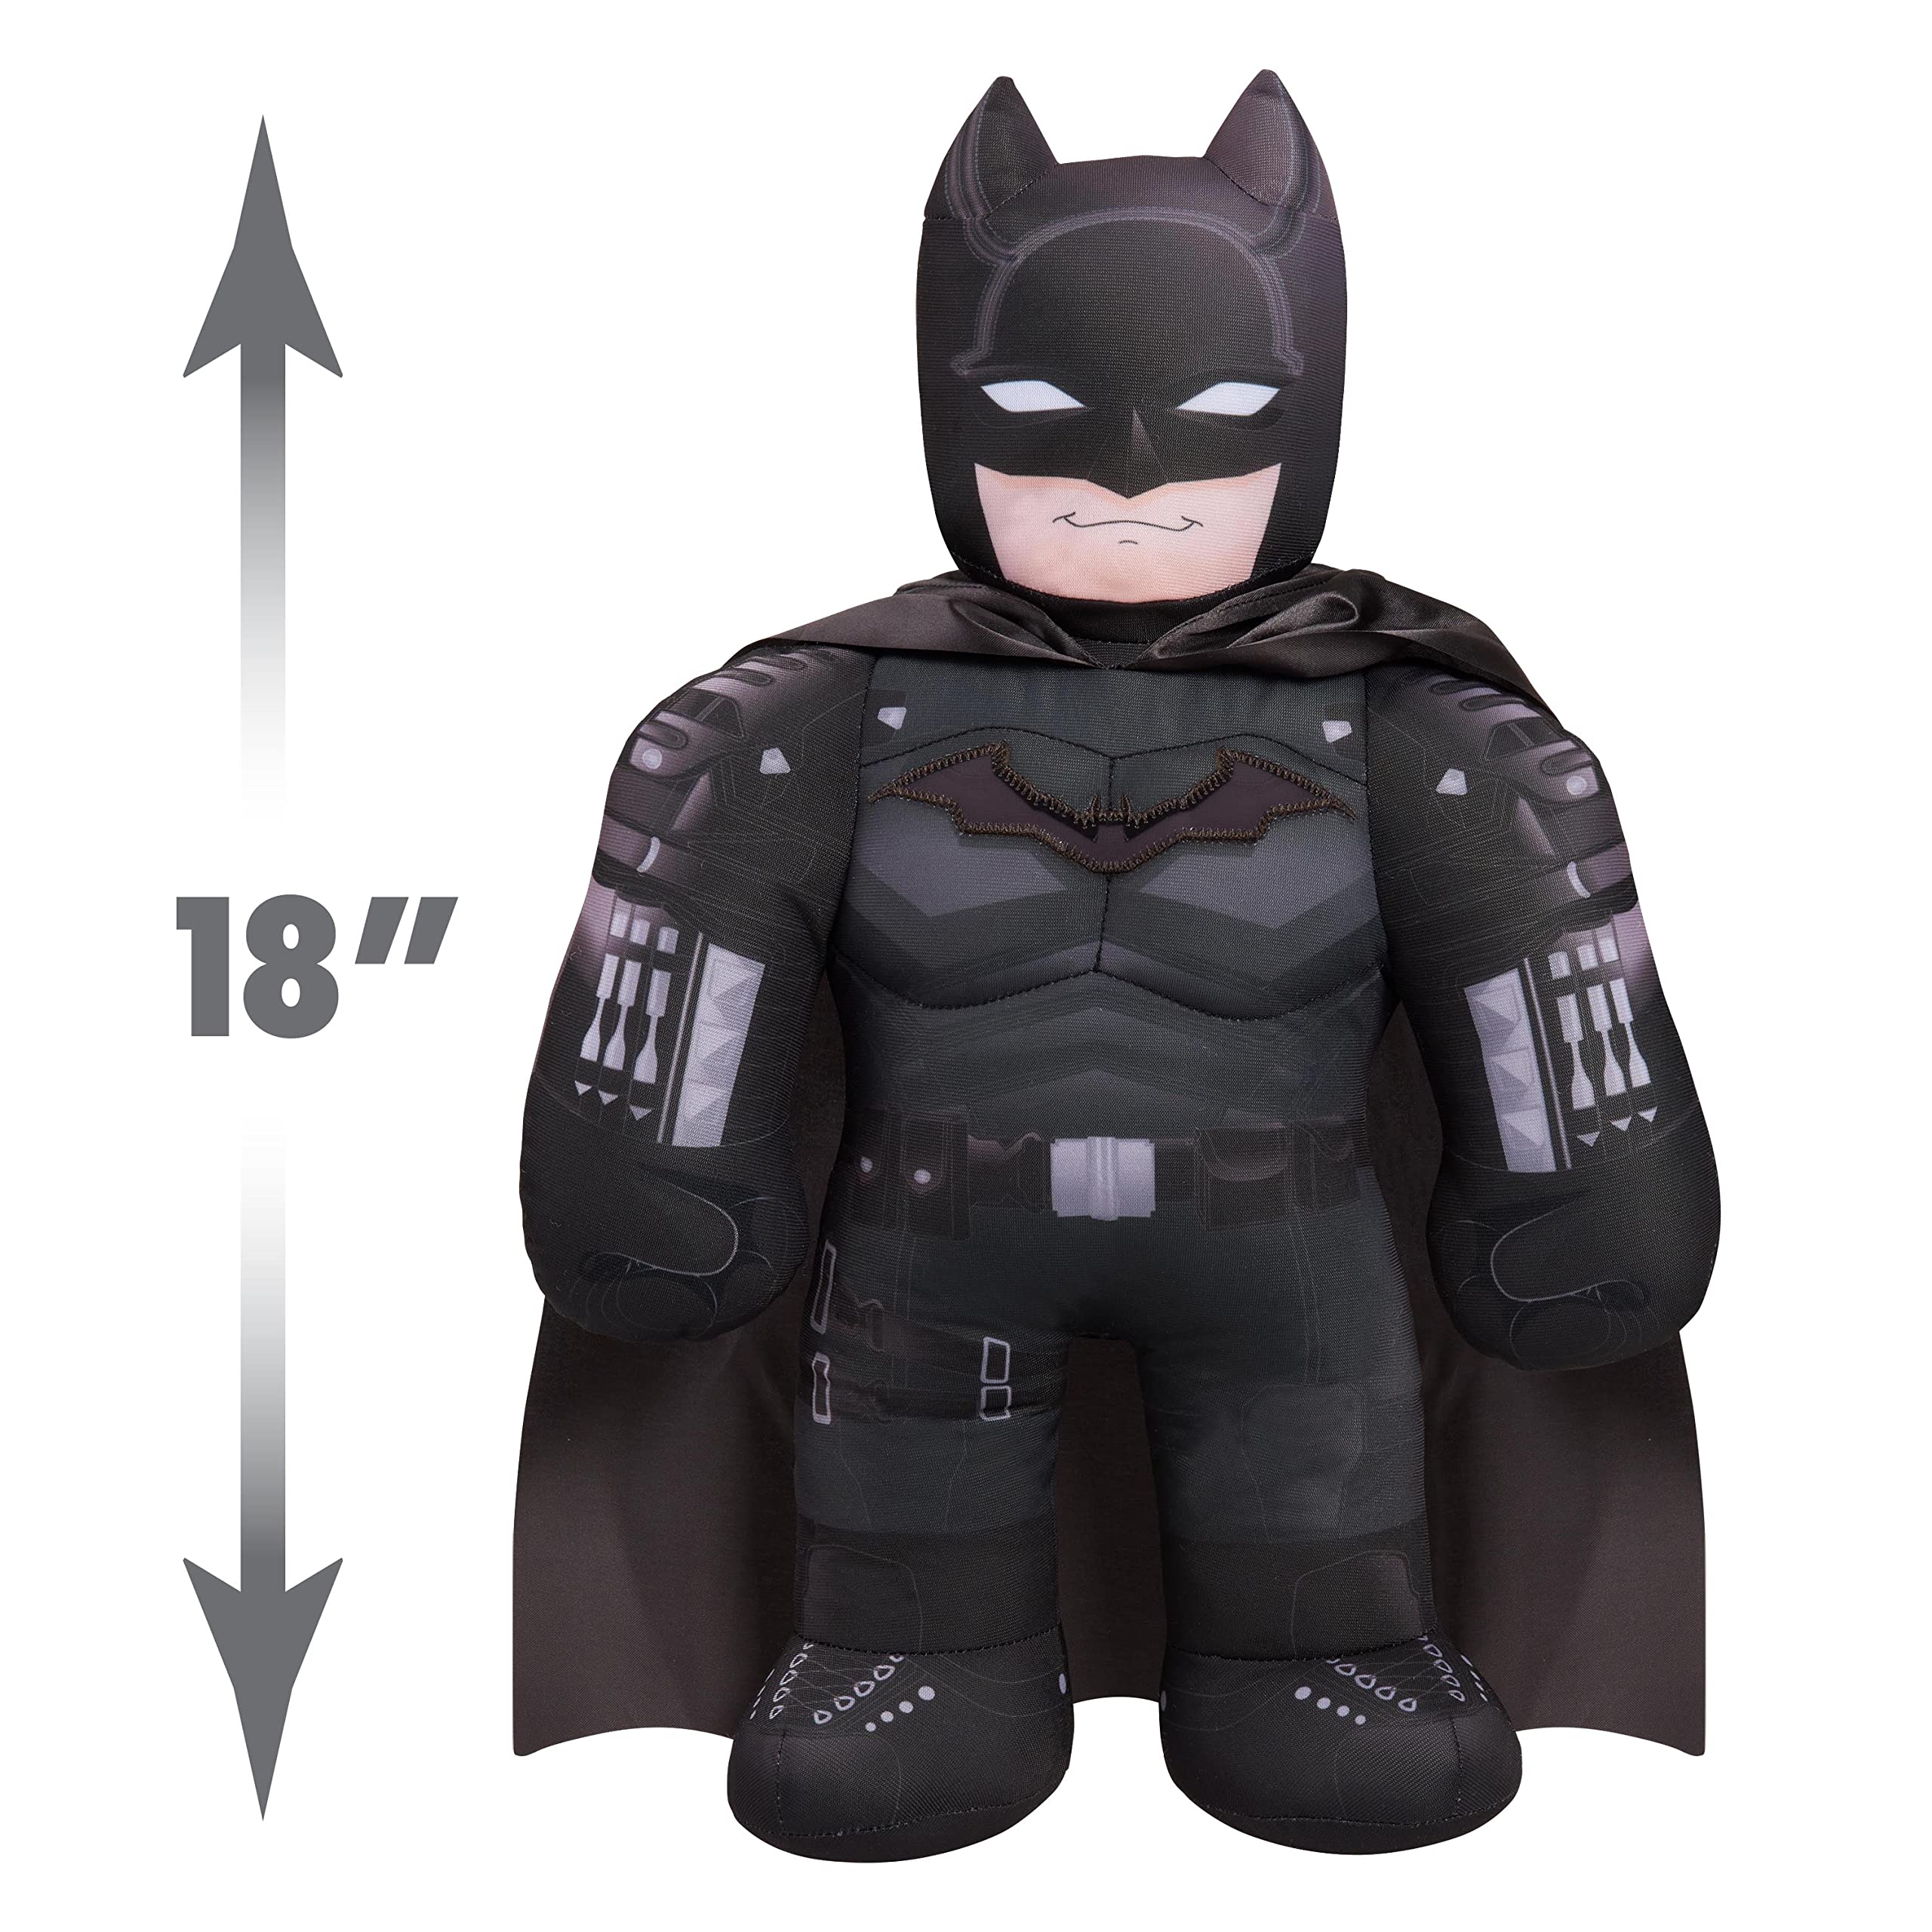 18" Just Play BATMAN The Bashin’ Battler Talking Plush Toy w/ Light-up Chest & Action Phrases $12 + Free Shipping w/ Prime or on $25+